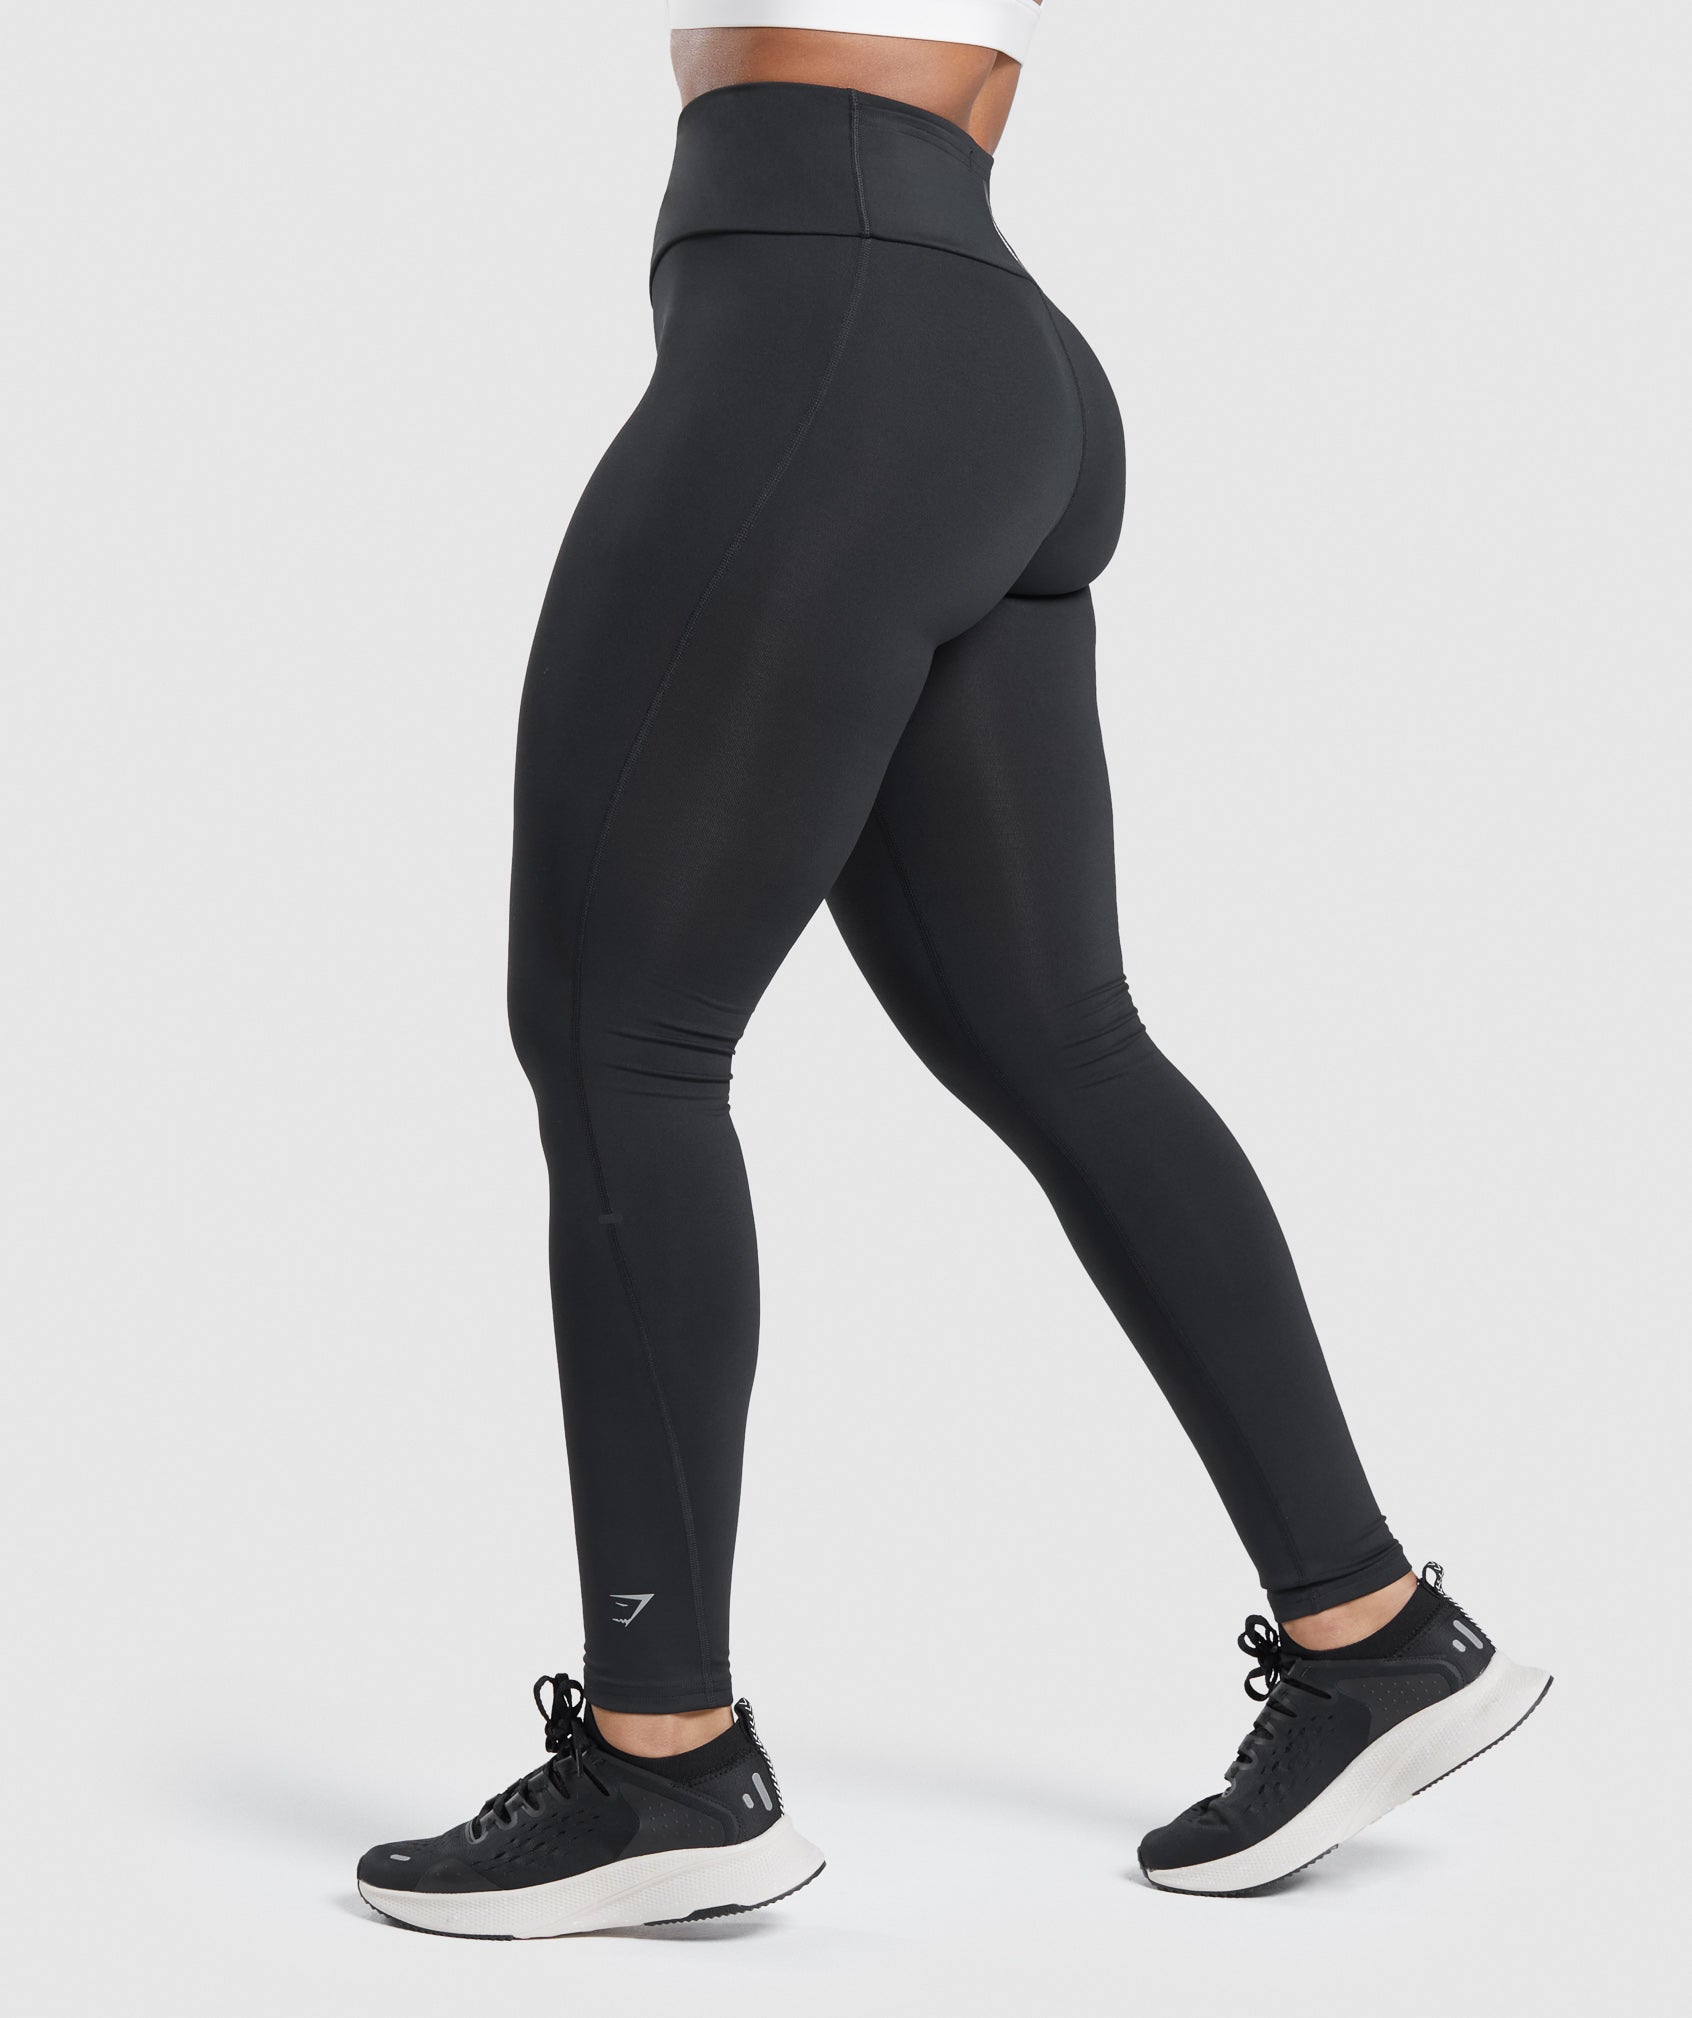 Gymshark Speed Leggings Women’s Size XS Black- NEW WITH TAGS